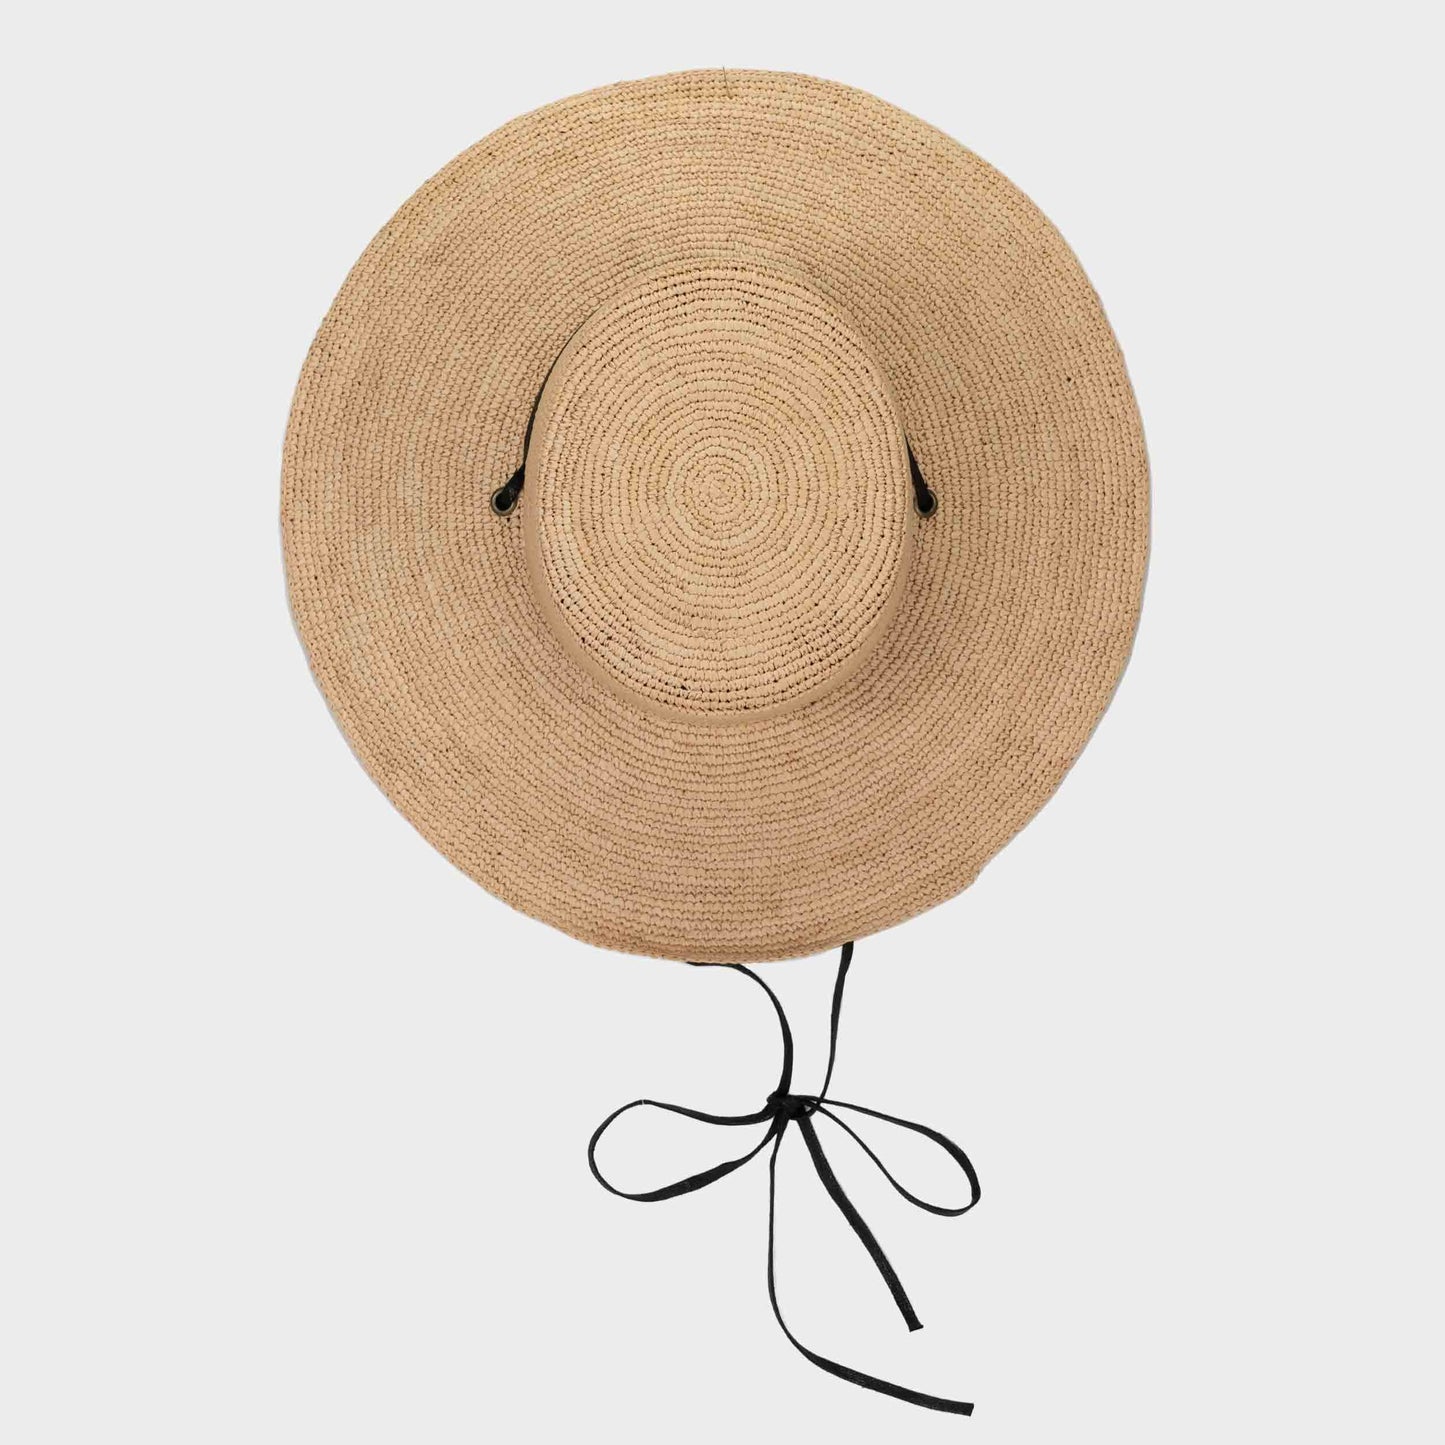 Handwoven Toquilla Straw hat in Natural/ Black